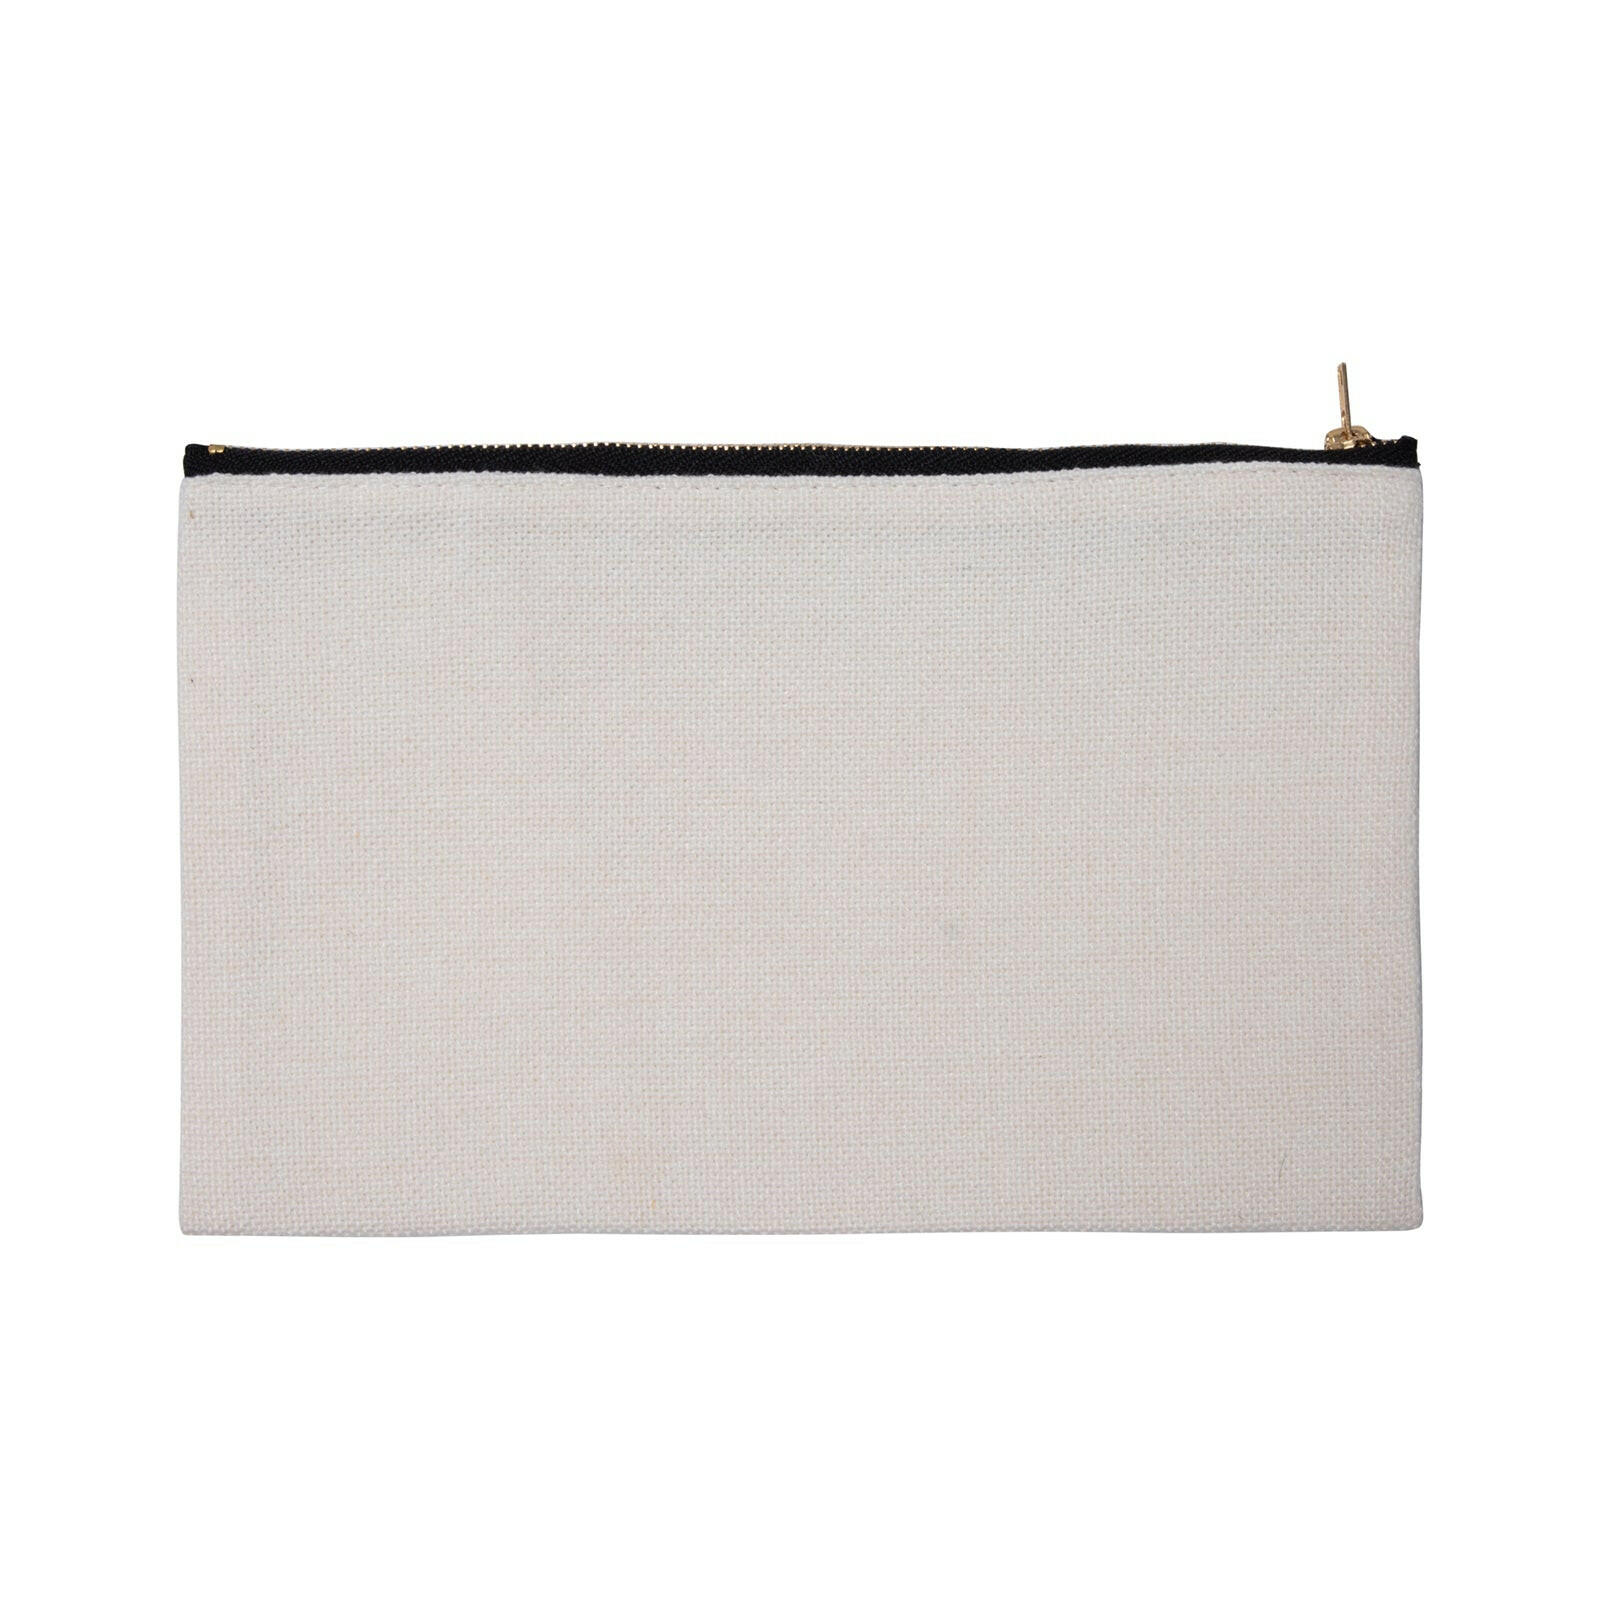 Linen Sublimation Cosmetic Bag - 4 Pack.